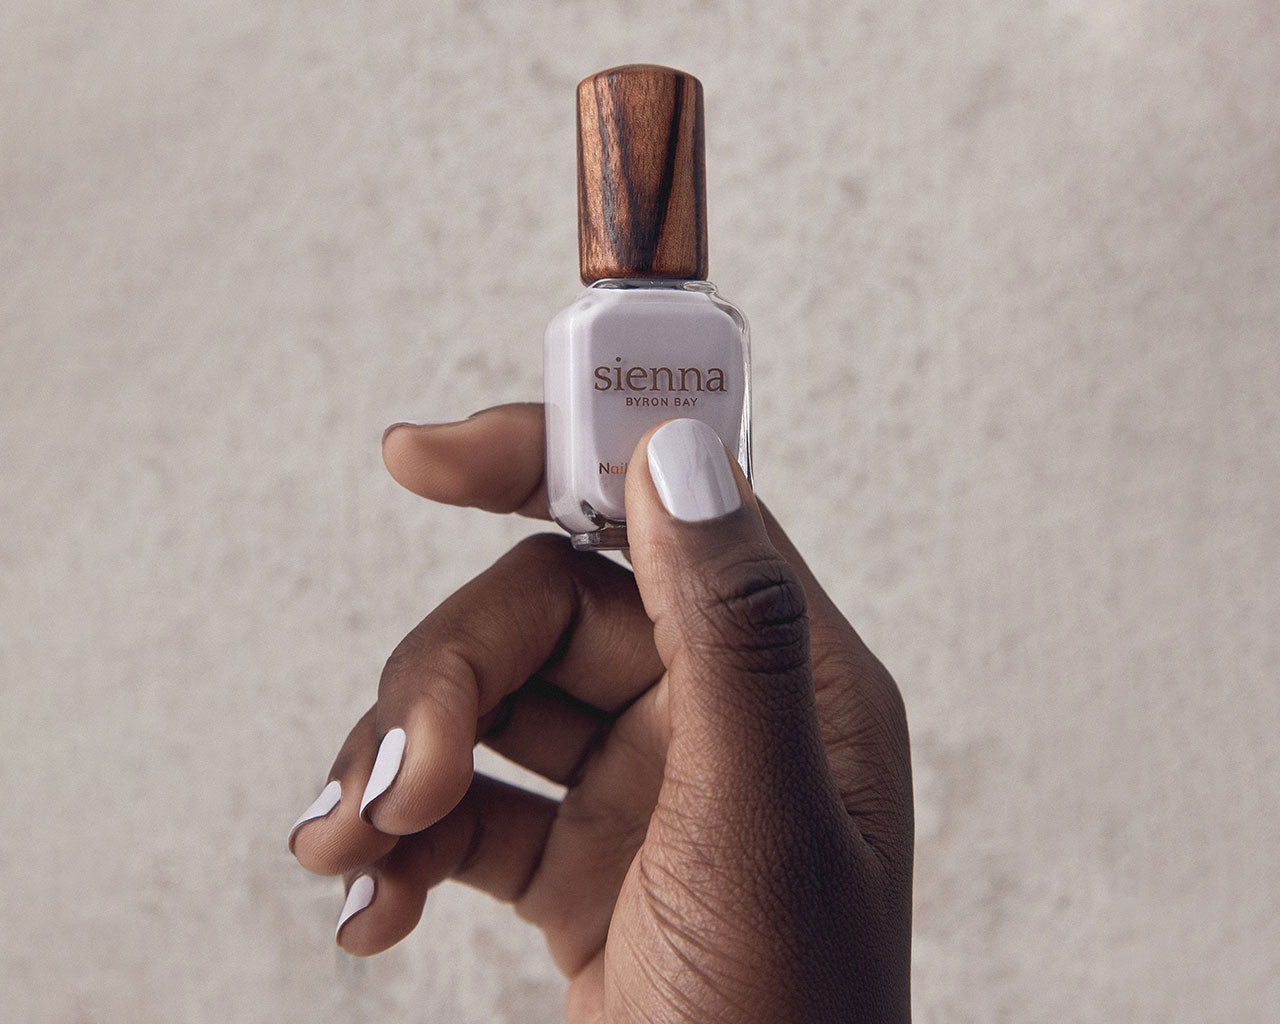 You Can't Wear Campaign Merch to Vote, But You Can Wear This Nail Polish |  Allure